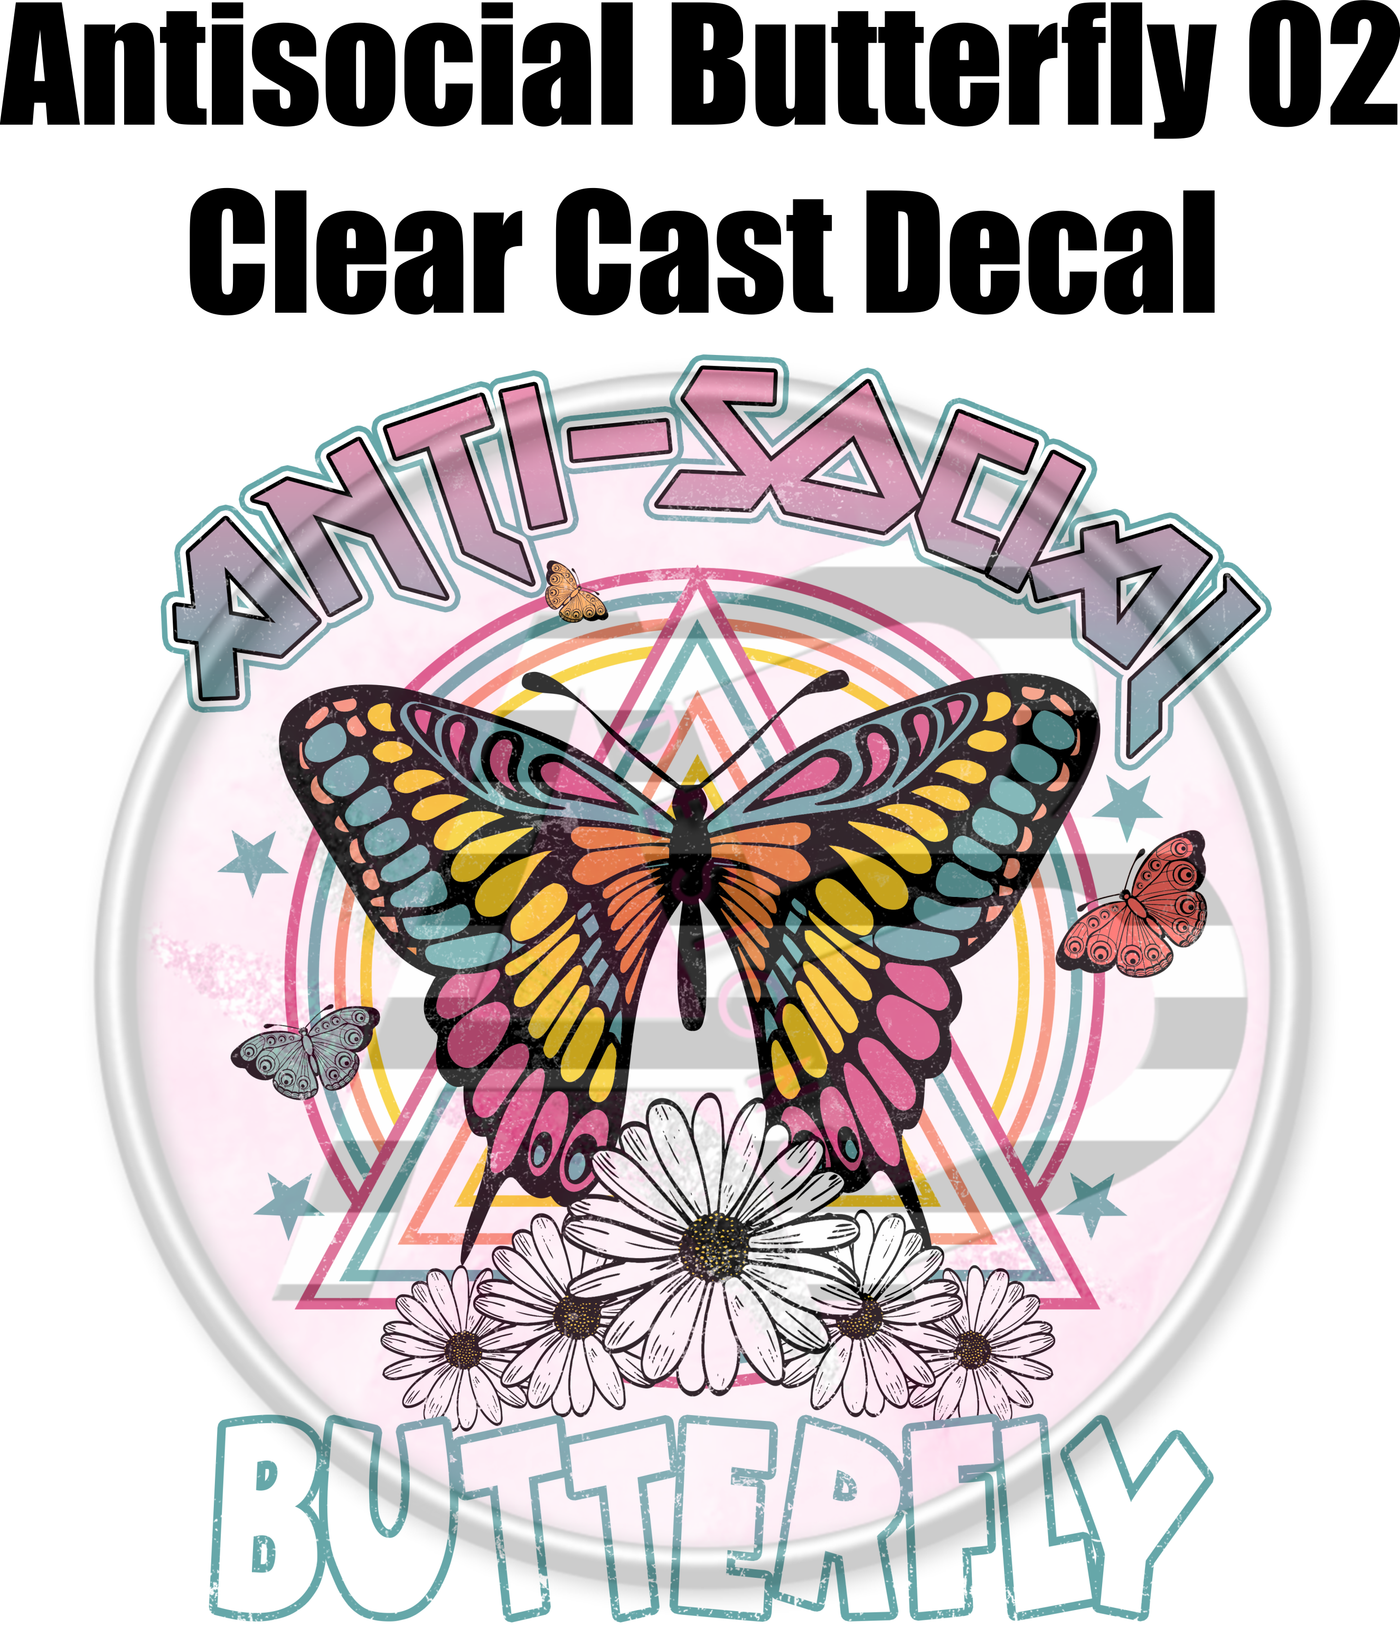 Anti Social Butterfly 02 - Clear Cast Decal-401